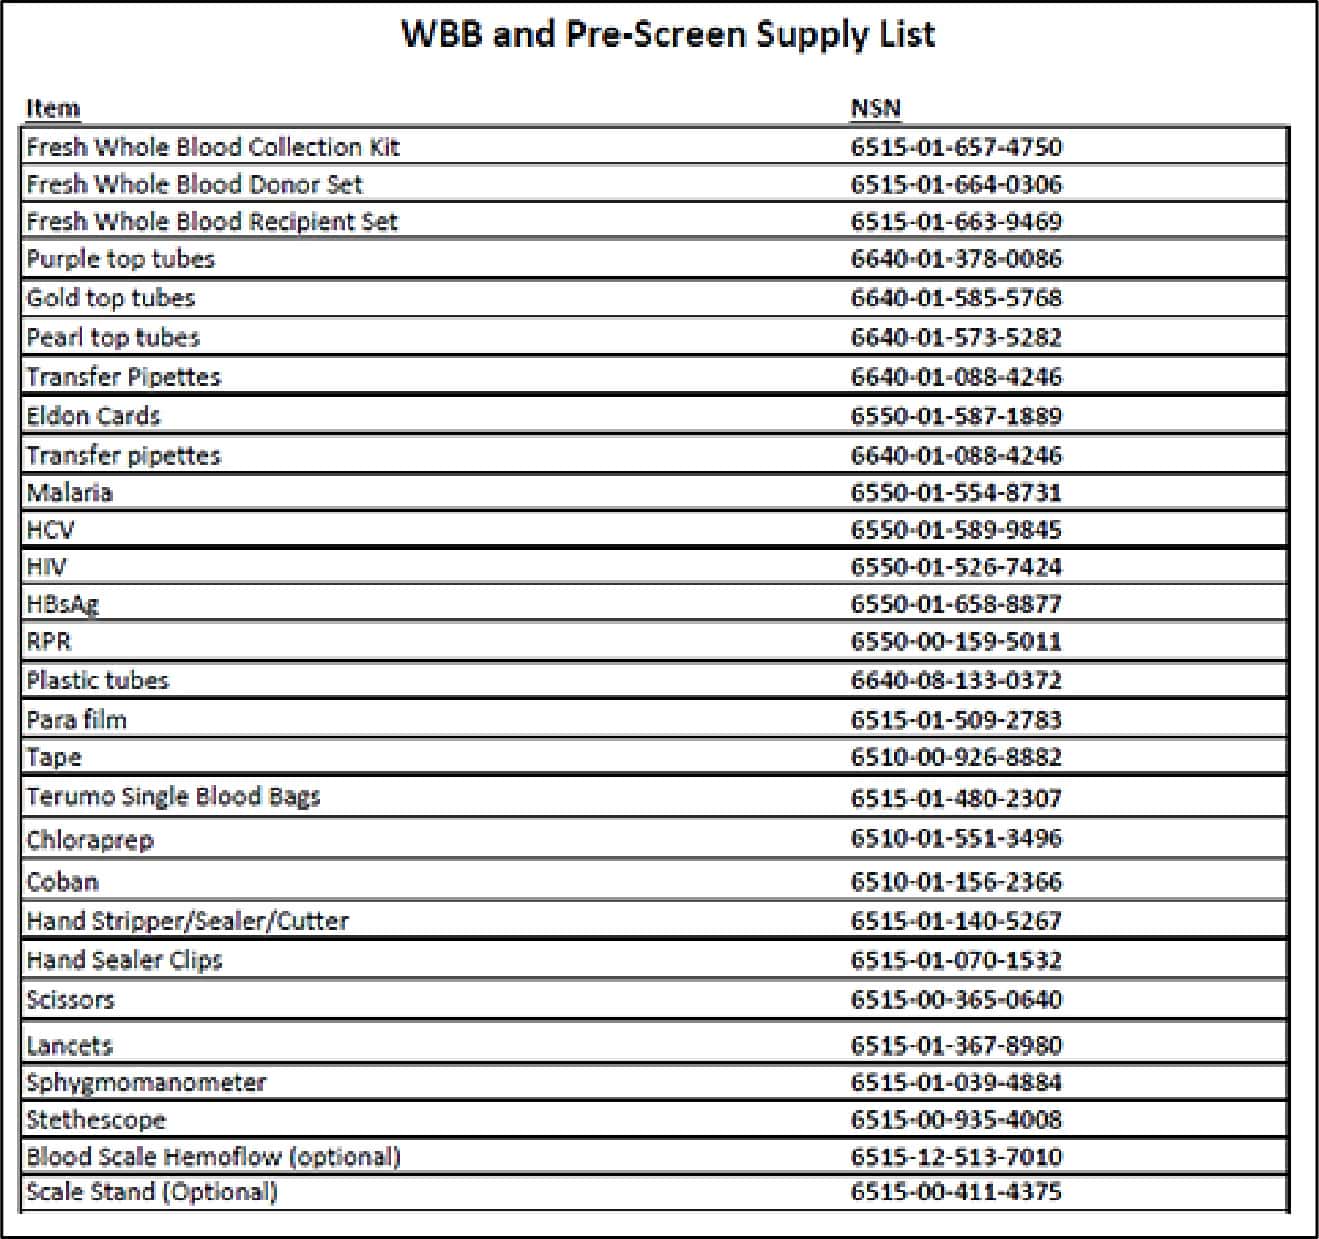 WBB and Pre-screen Supply List